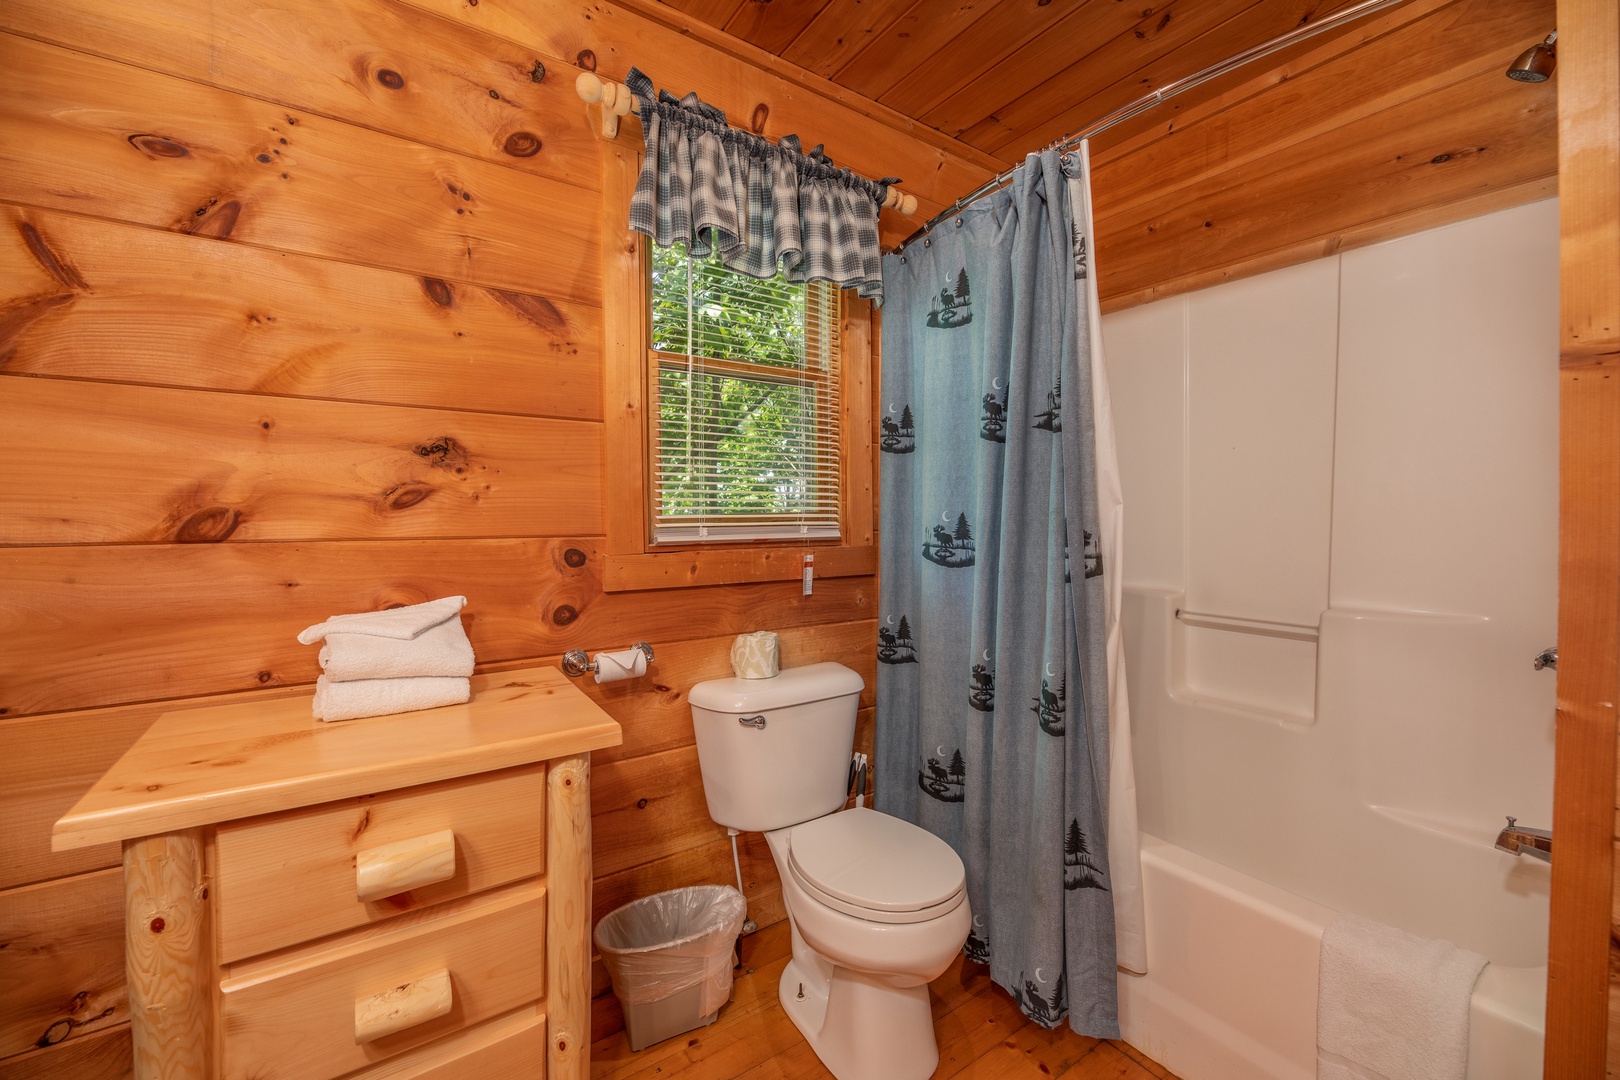 Bathroom with a tub and shower at Misty Mountain Escape, a 2 bedroom cabin rental located in Gatlinburg